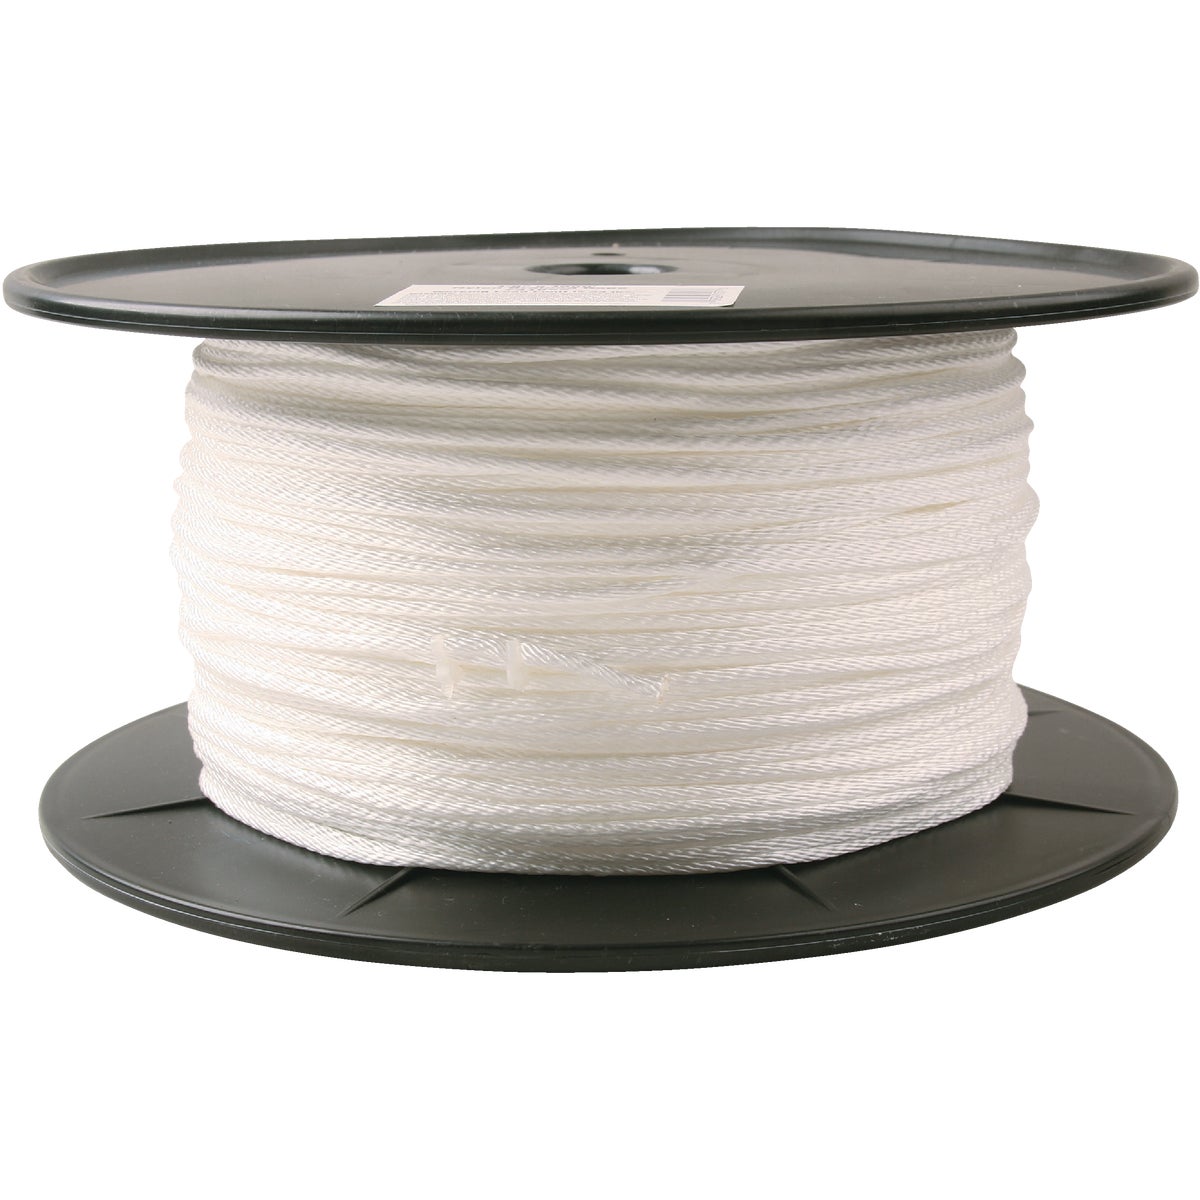 Item 741059, Braided nylon, all-purpose rope ideal for a wide variety of applications.